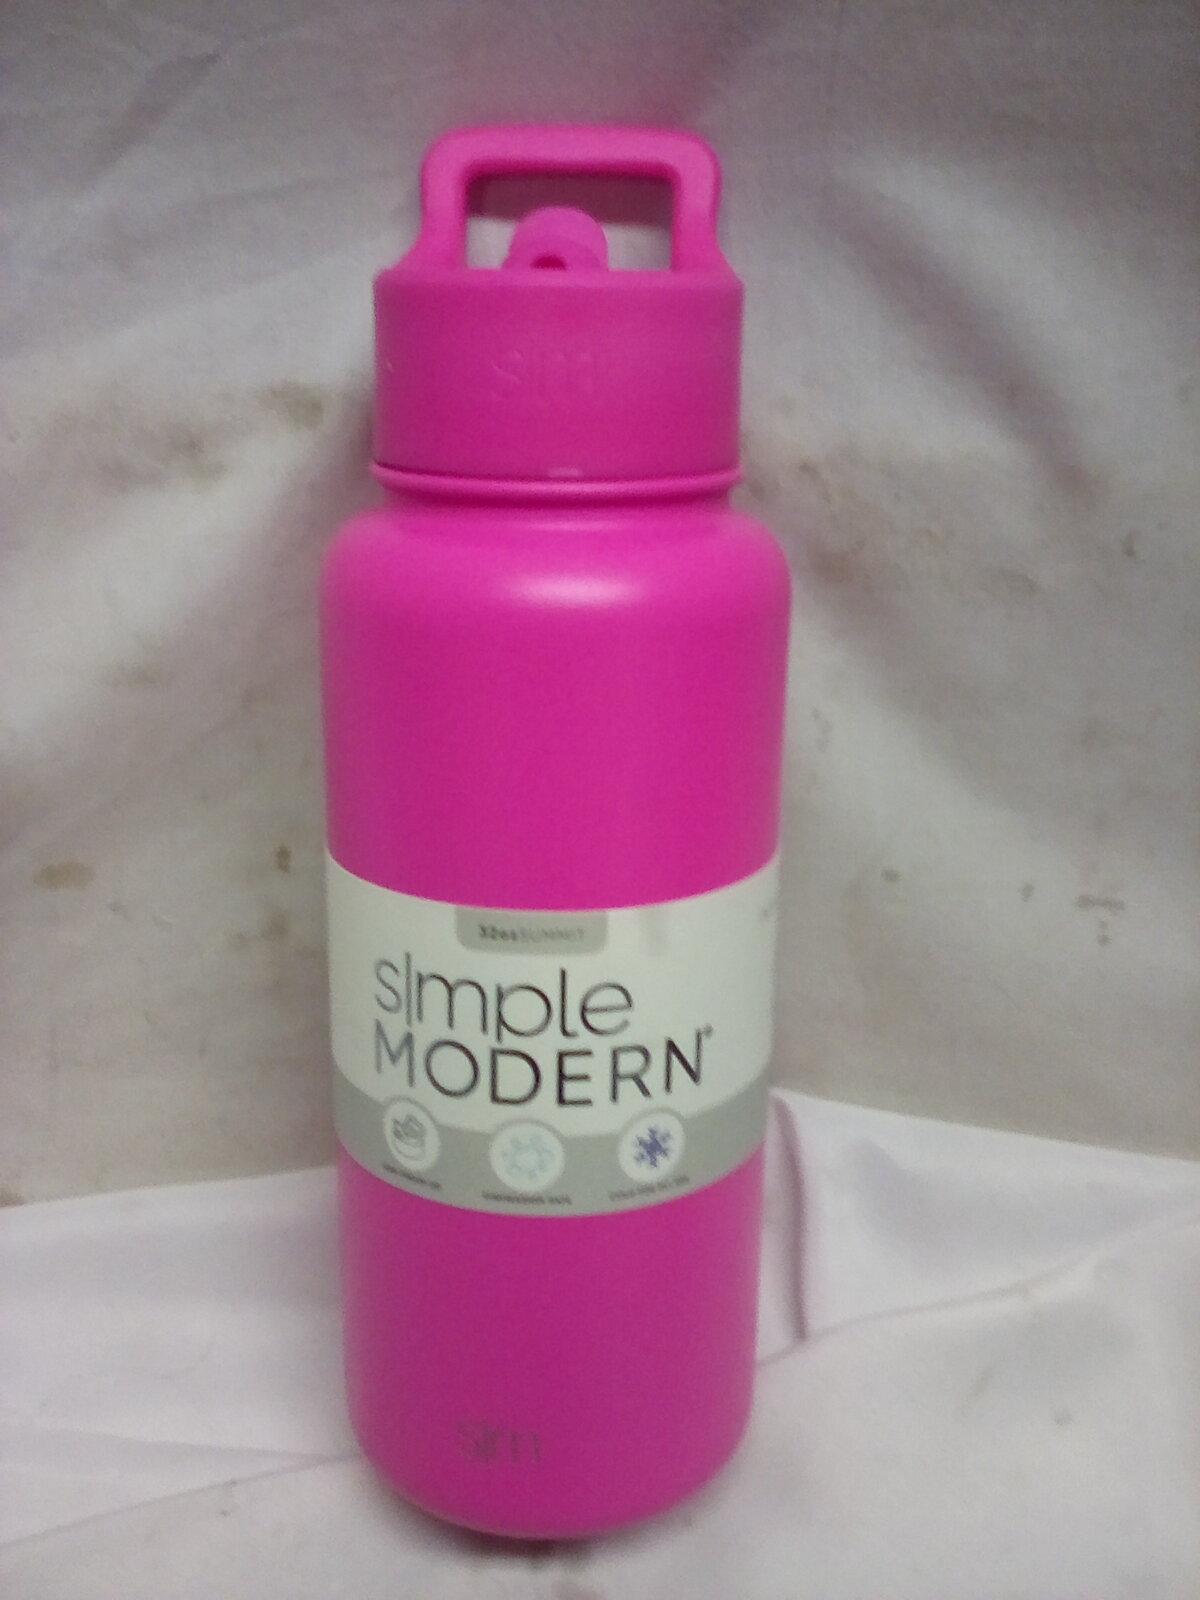 Simple Modern 32 oz. Insulated Rust Proof Stainless Steel. Pink.